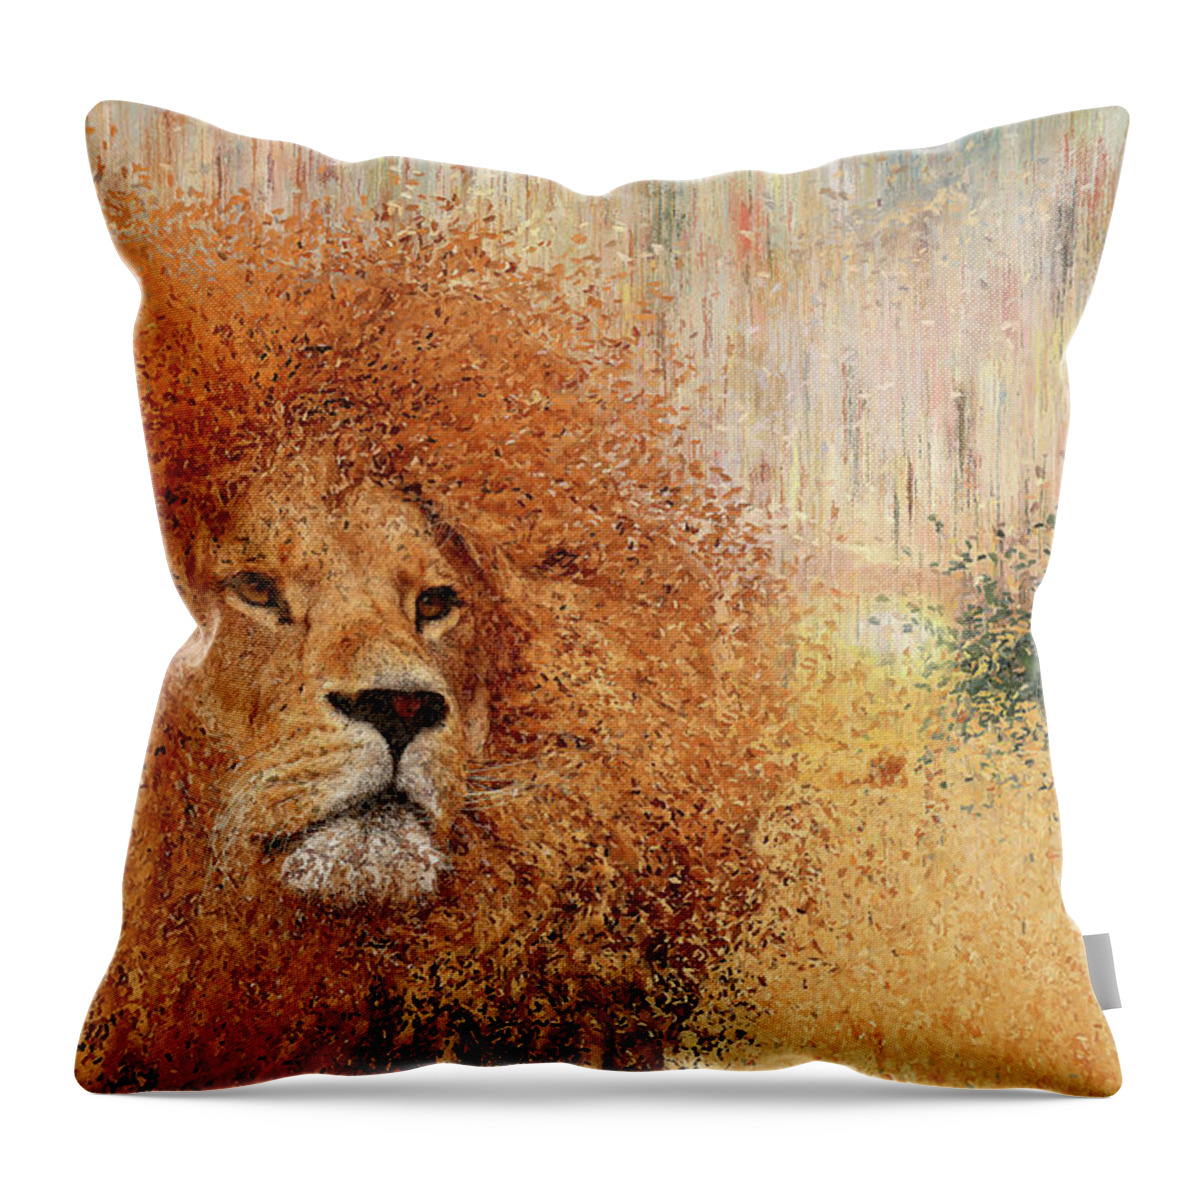 Lion Throw Pillow featuring the painting Lion by Alex Mir